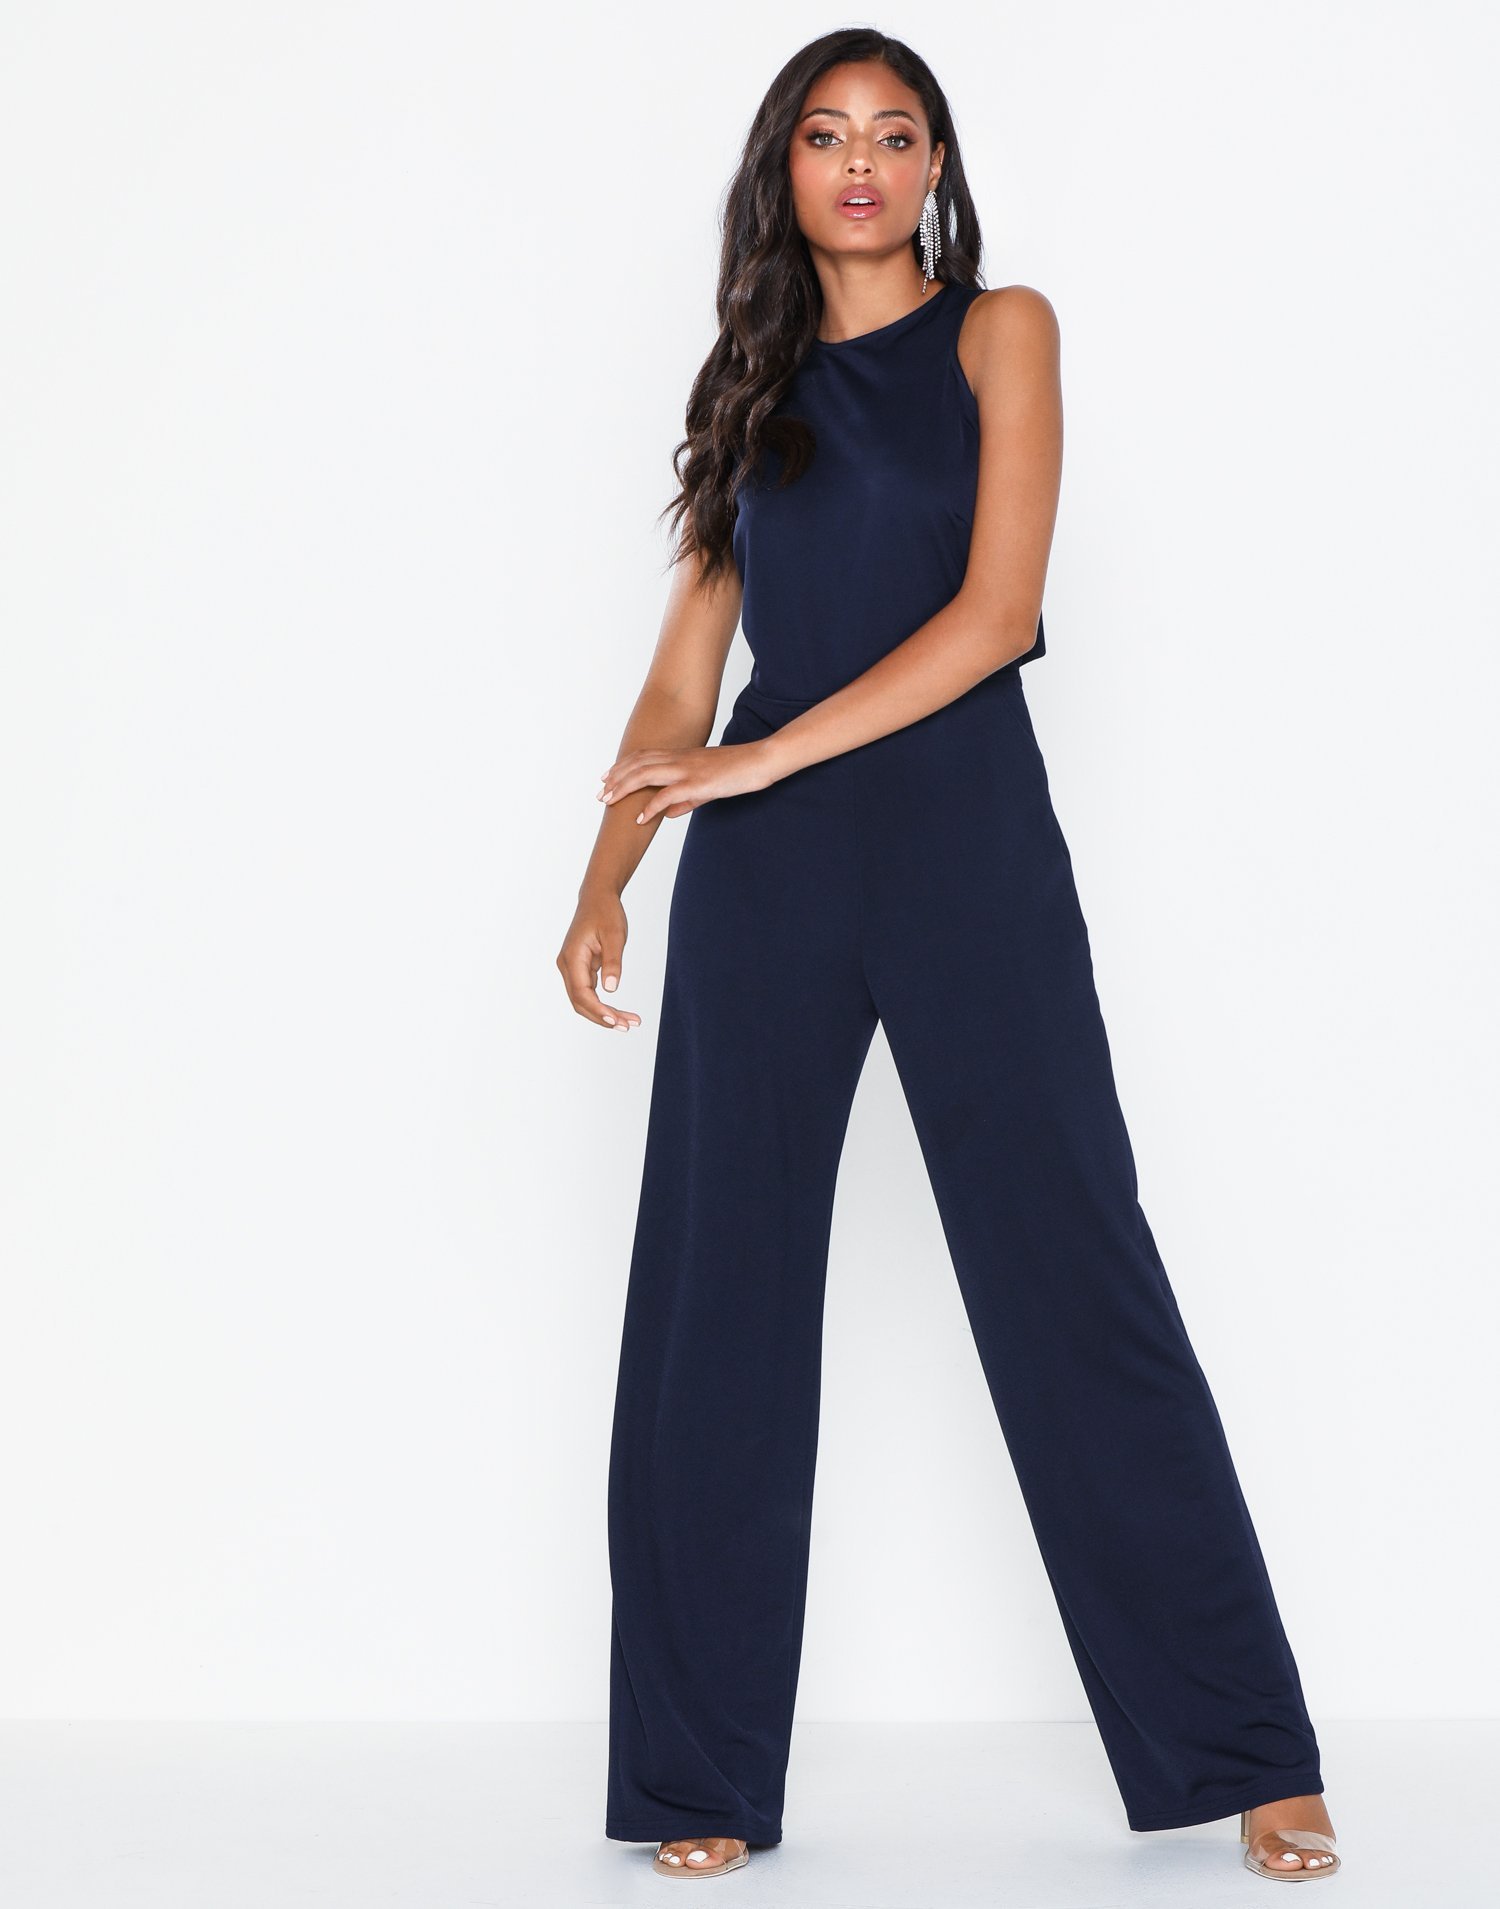 jeans jumpsuit nelly